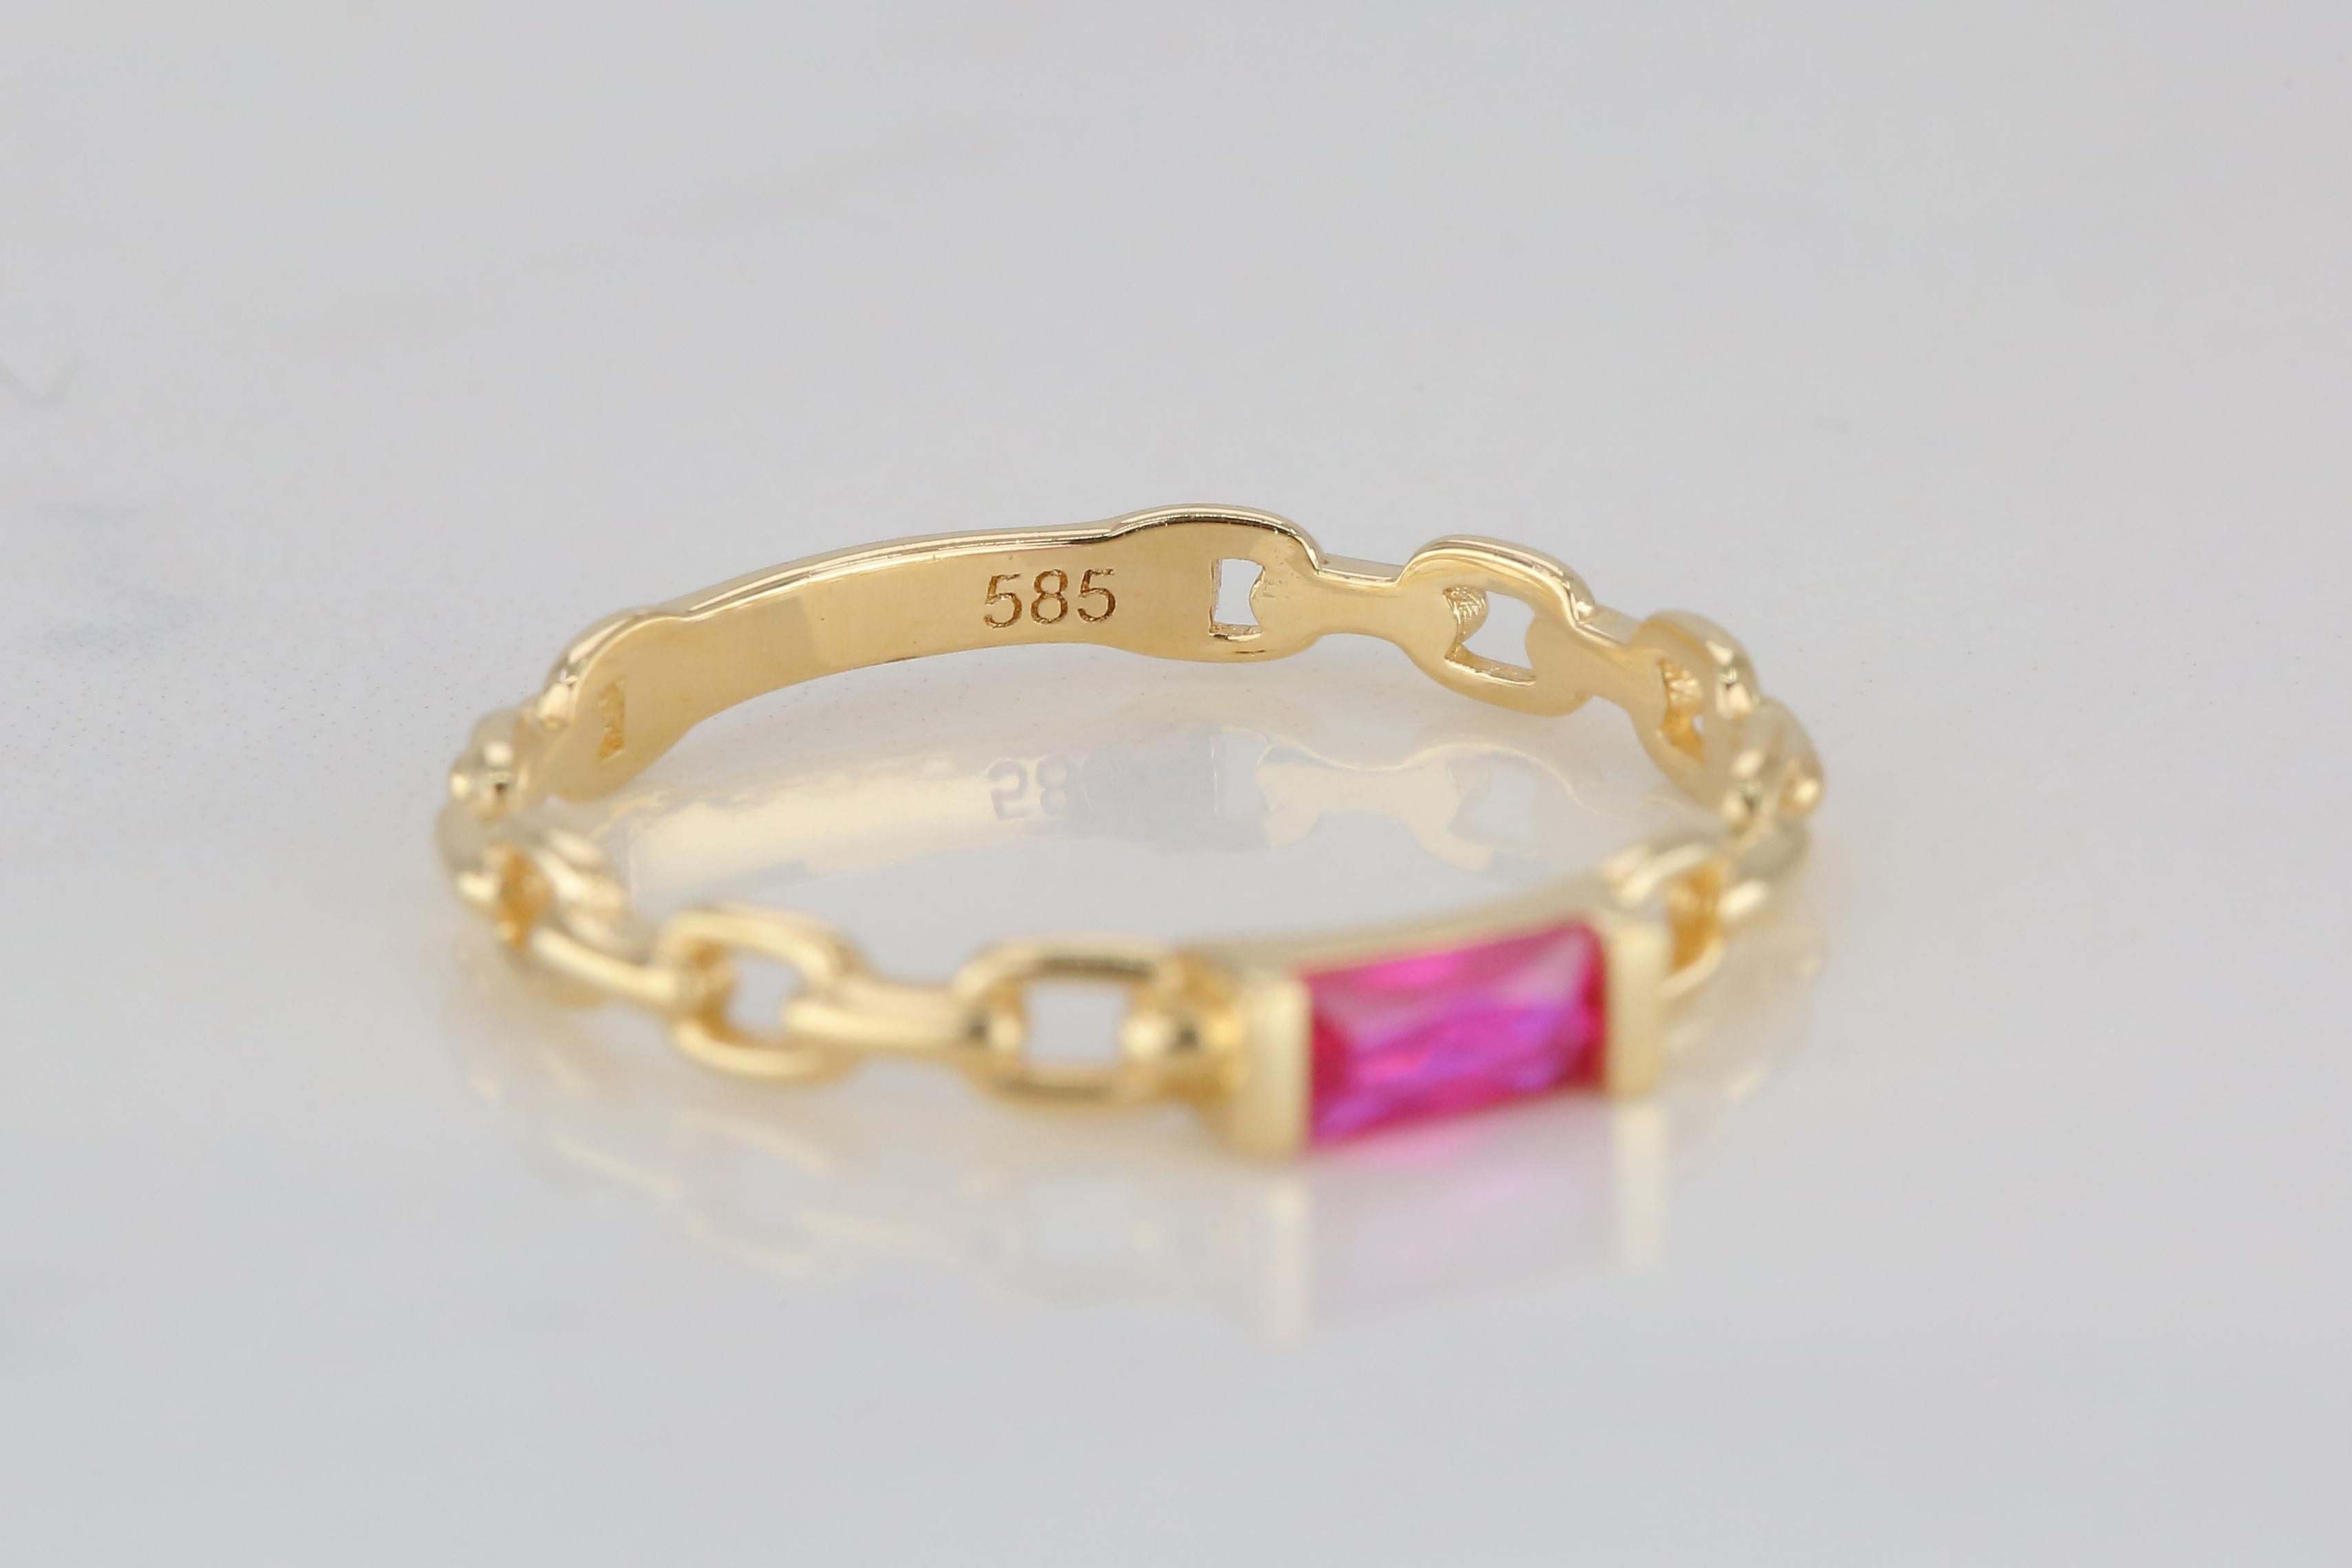 For Sale:  14 K Solid Gold Chain Link Ring -with Pink Quartz, Modern Minimal Ring 6